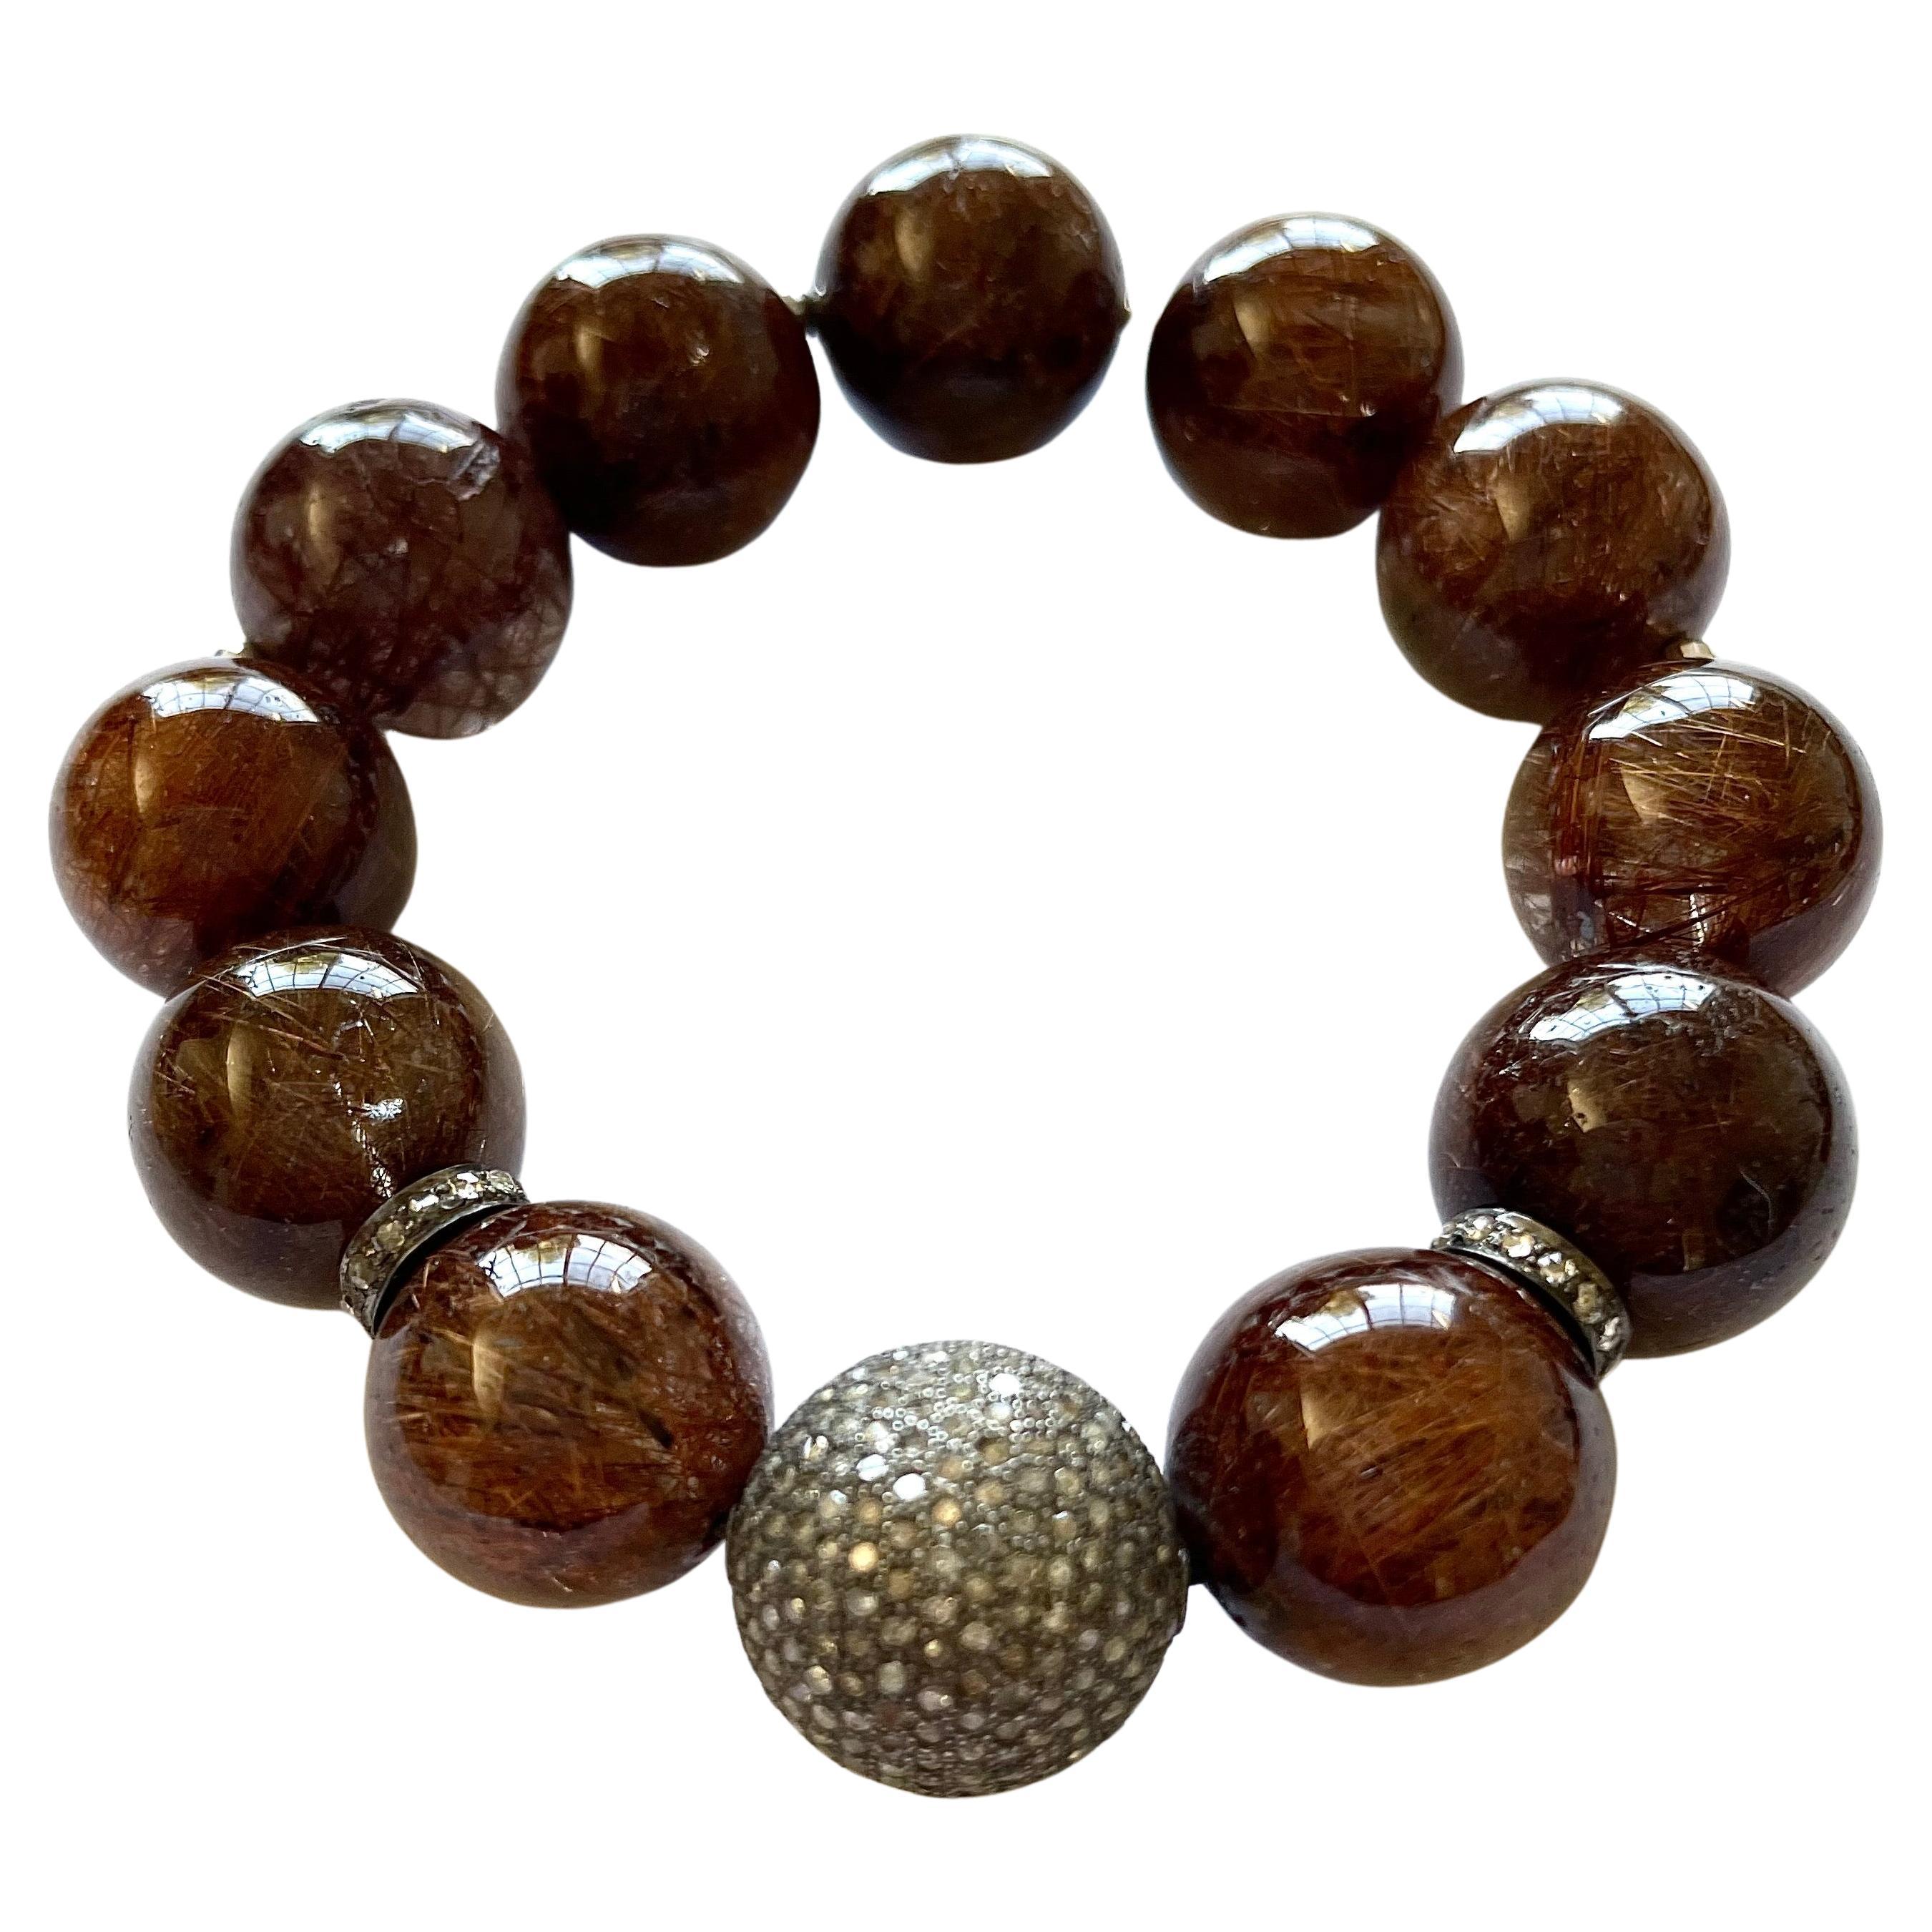 Description
This superior quality, rare coppery-brown Rutilated Quartz, dramatically accented with a stunning, large 16mm pave diamond ball and pave diamond rondelles makes this stretchy bracelet a fashion must have on your wrist.
Item #